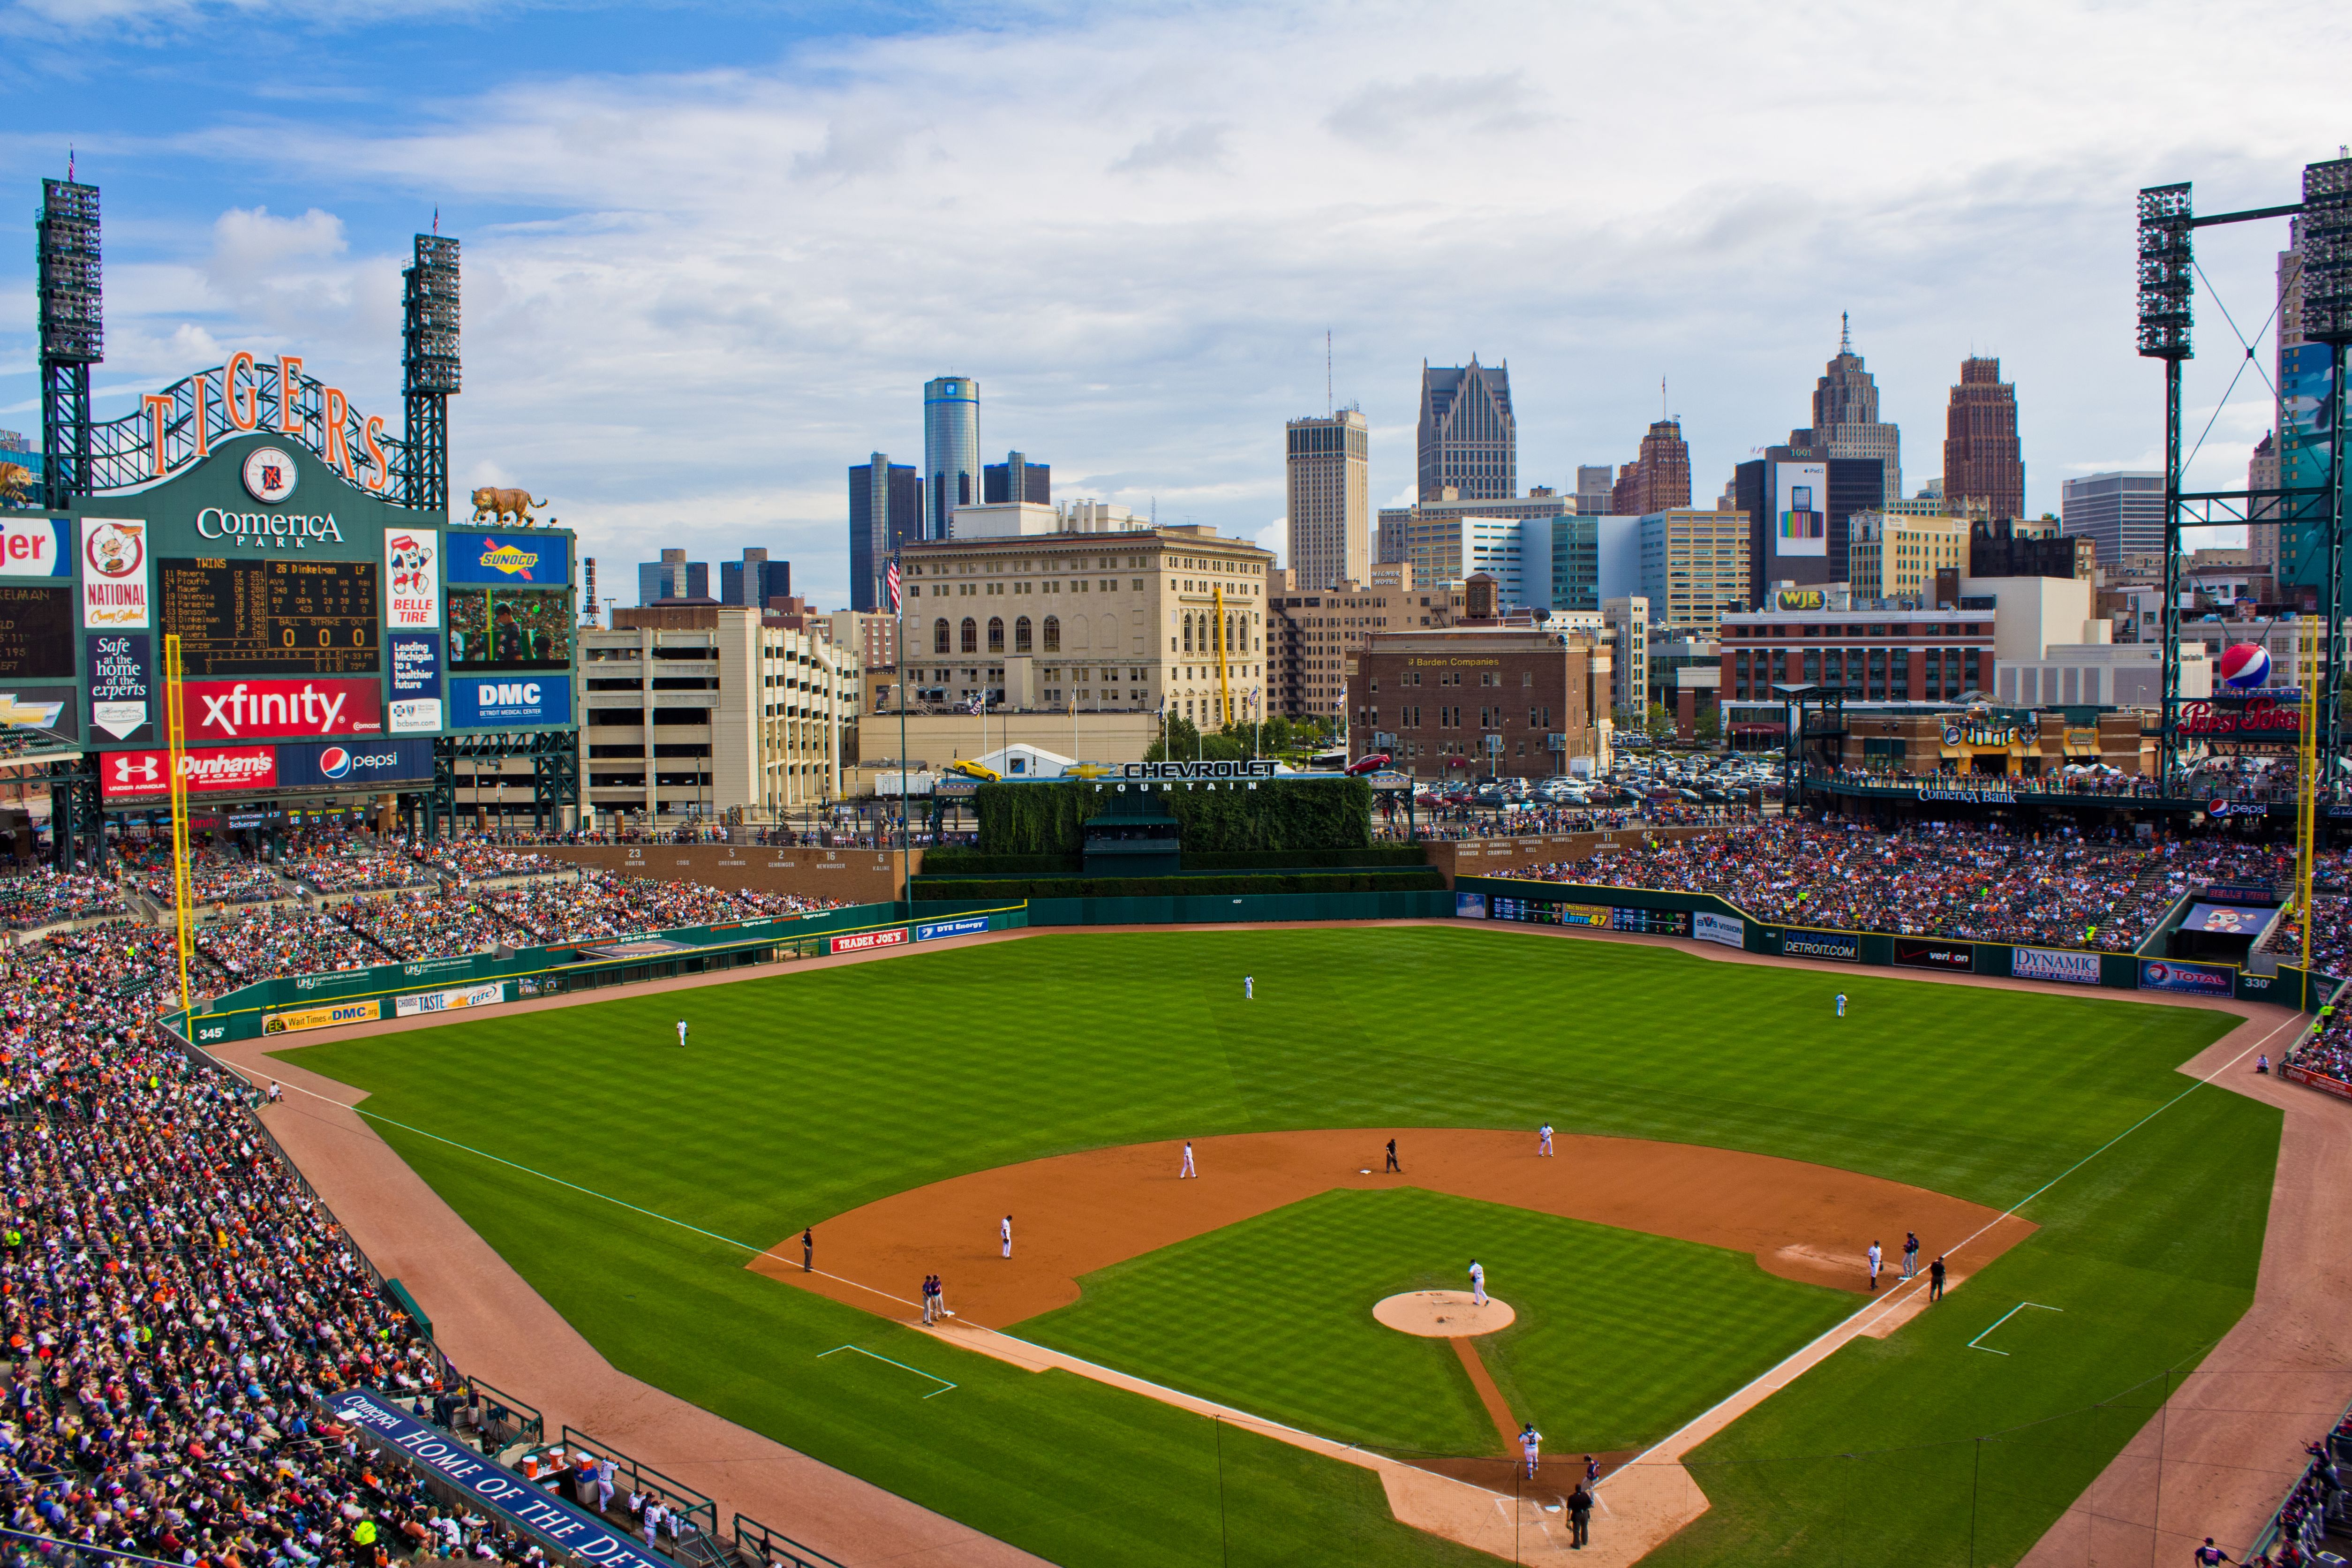 How to Eat and Drink Well Near Comerica Park